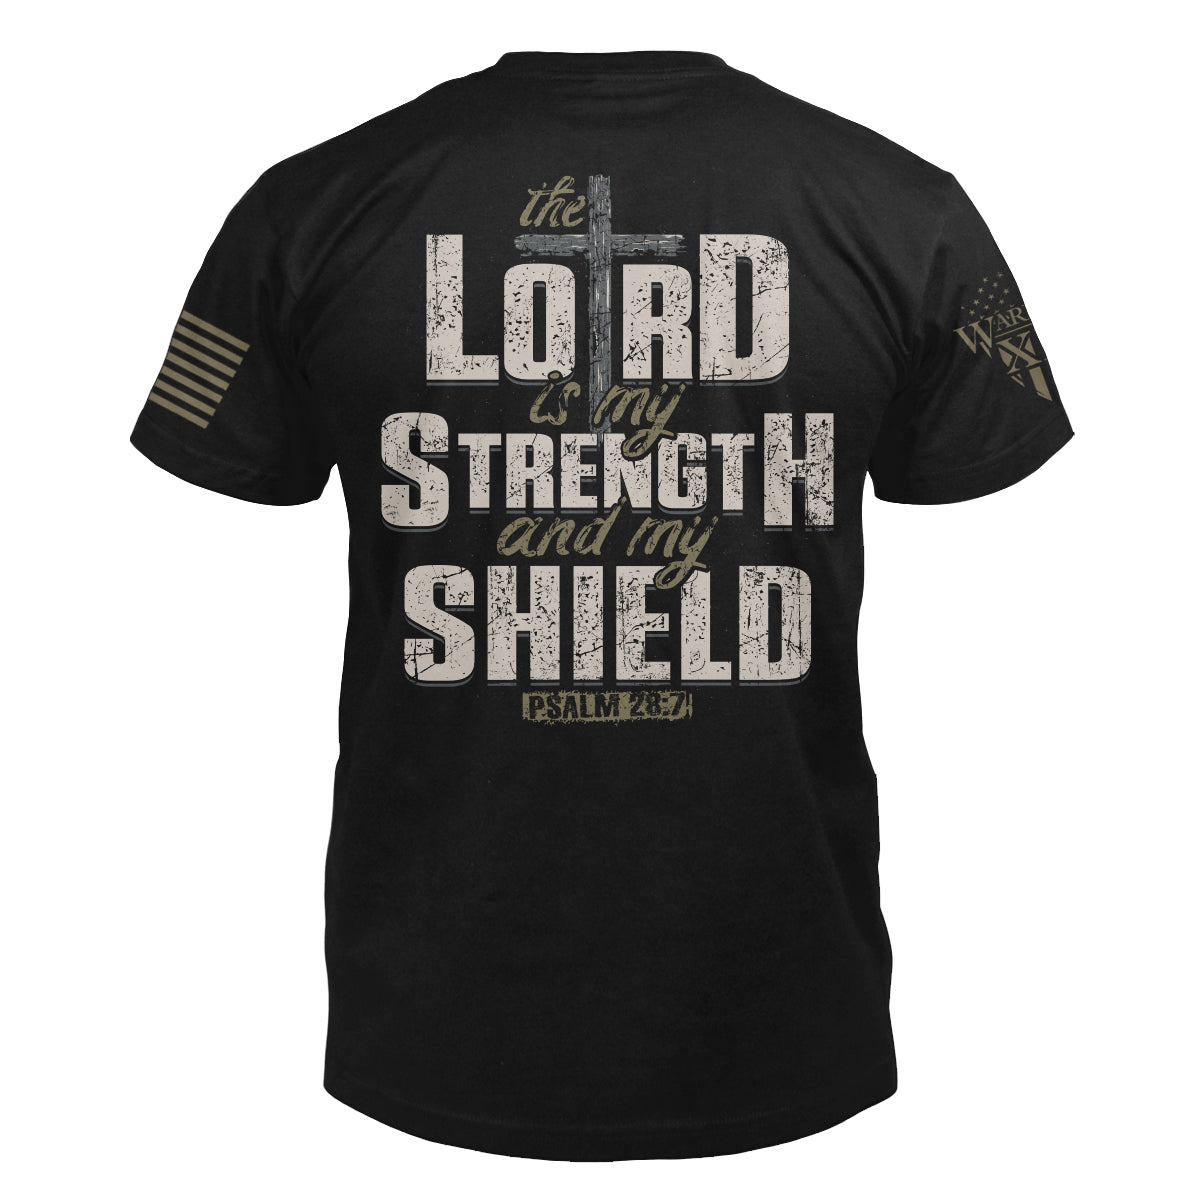 The back of "The Lord Is My Strength" featuring the main design of, The Lord Is My Strength.